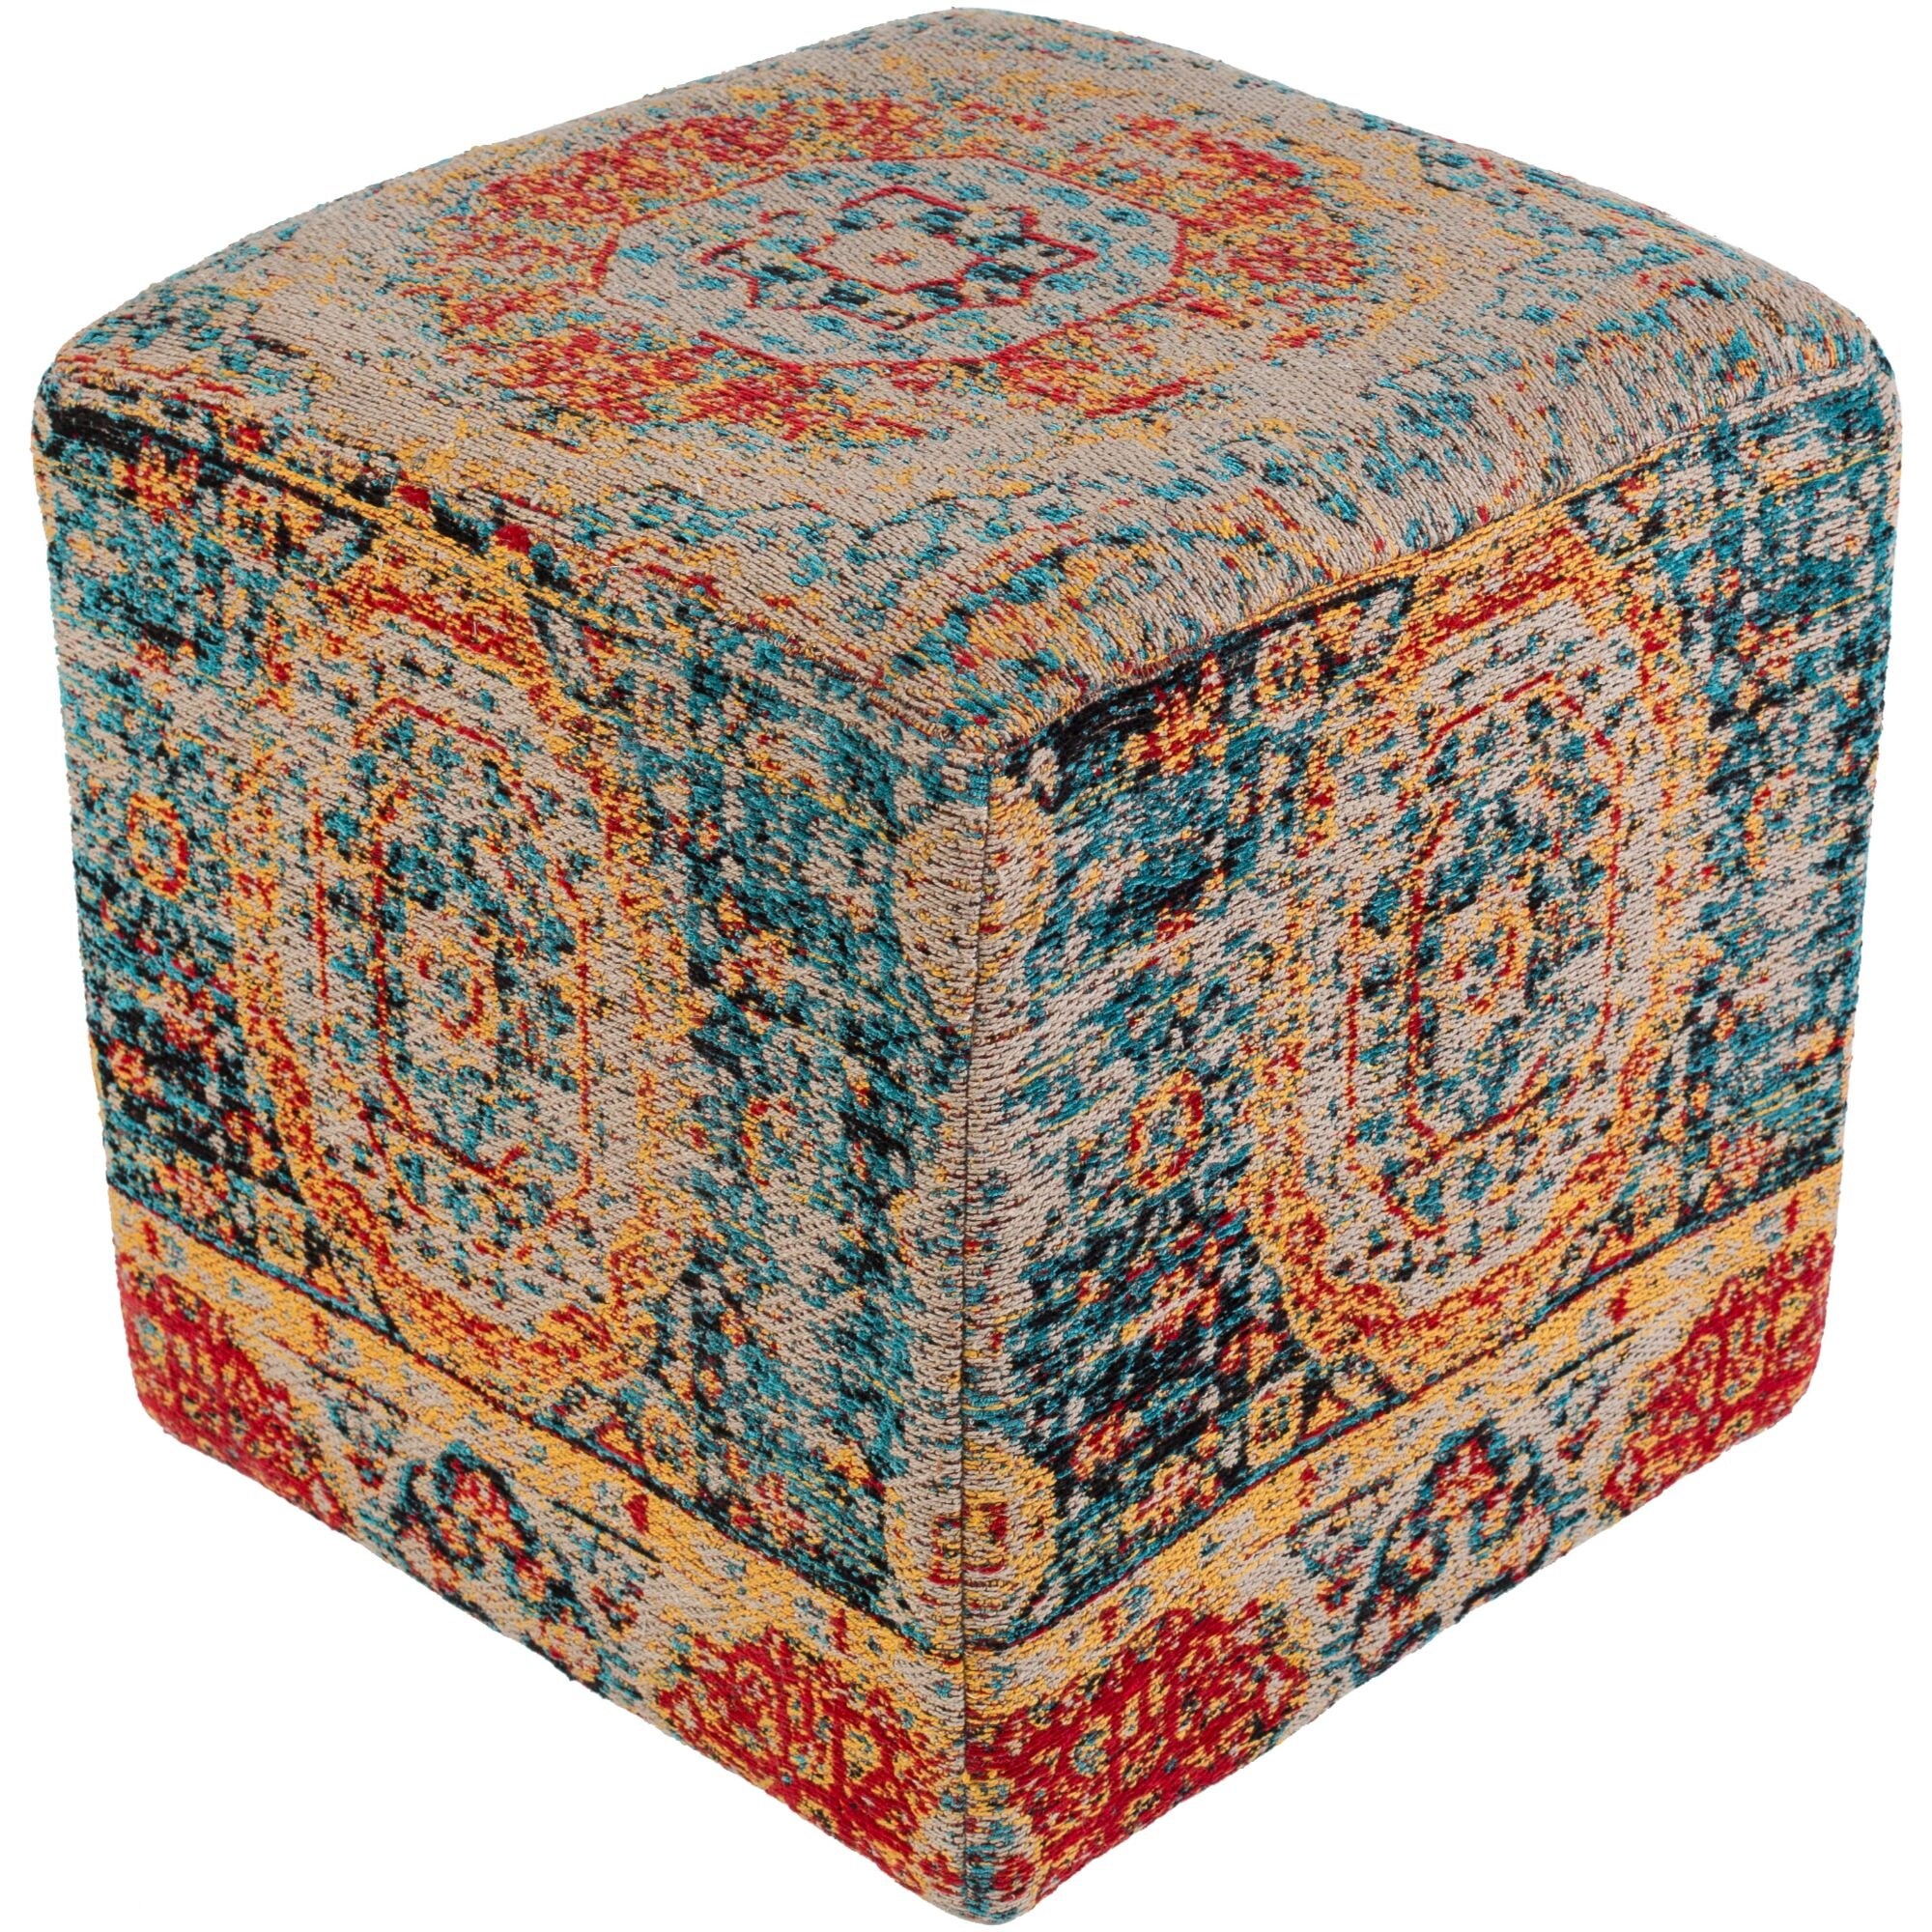 18" Blue and Red Distressed Finish Cubic Pouf Ottoman